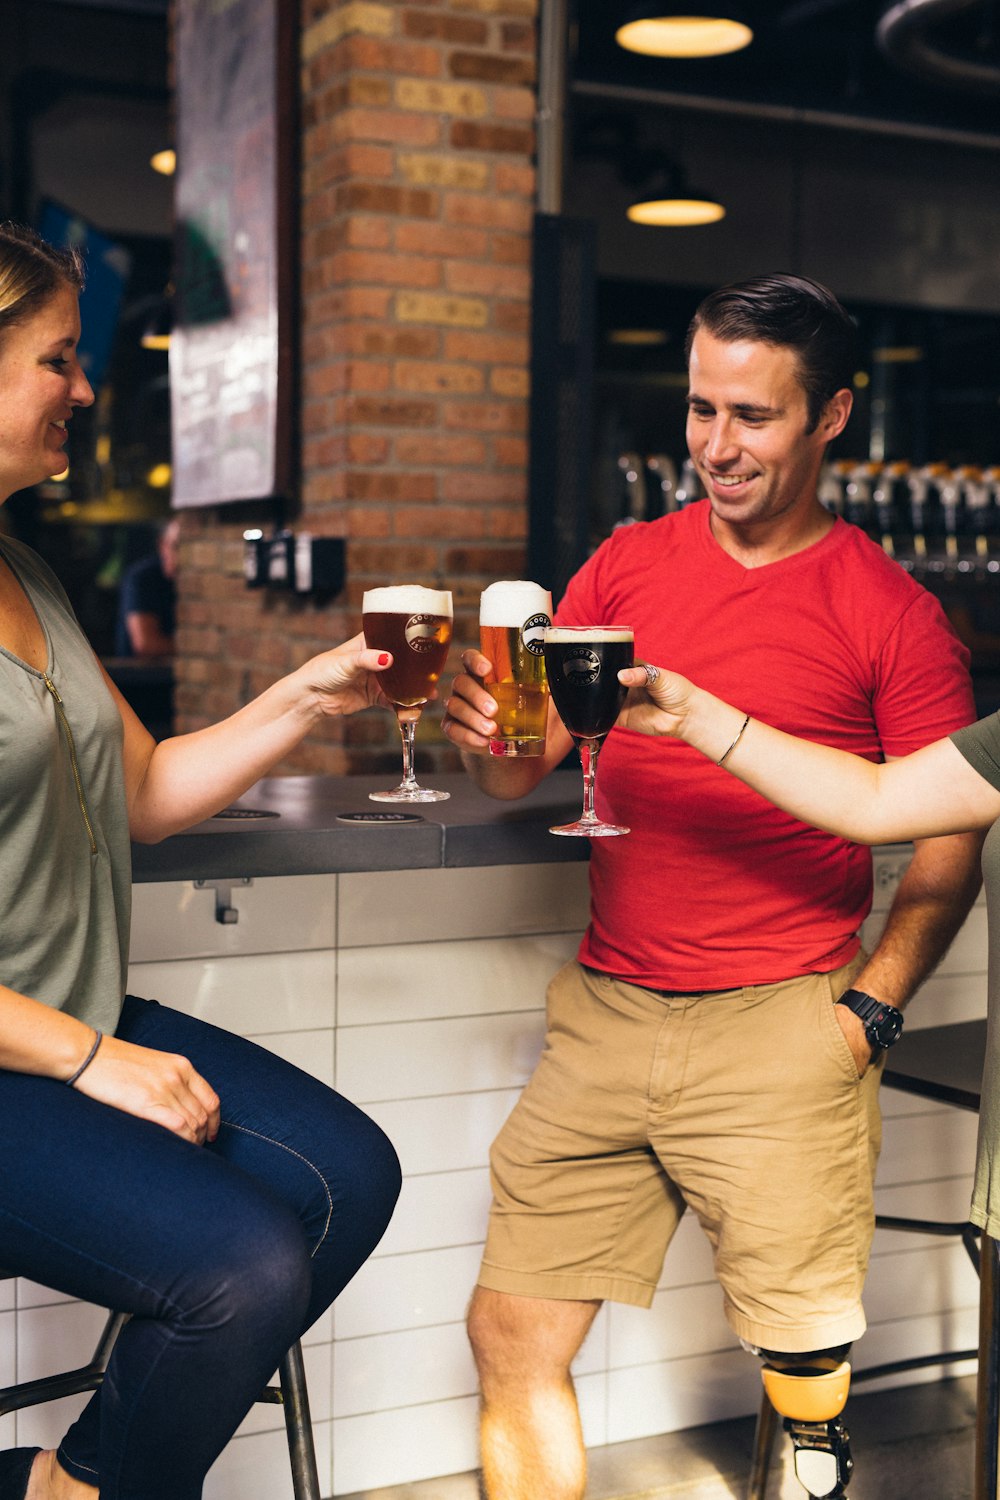 woman sitting on bar stool near another two person toasting beer